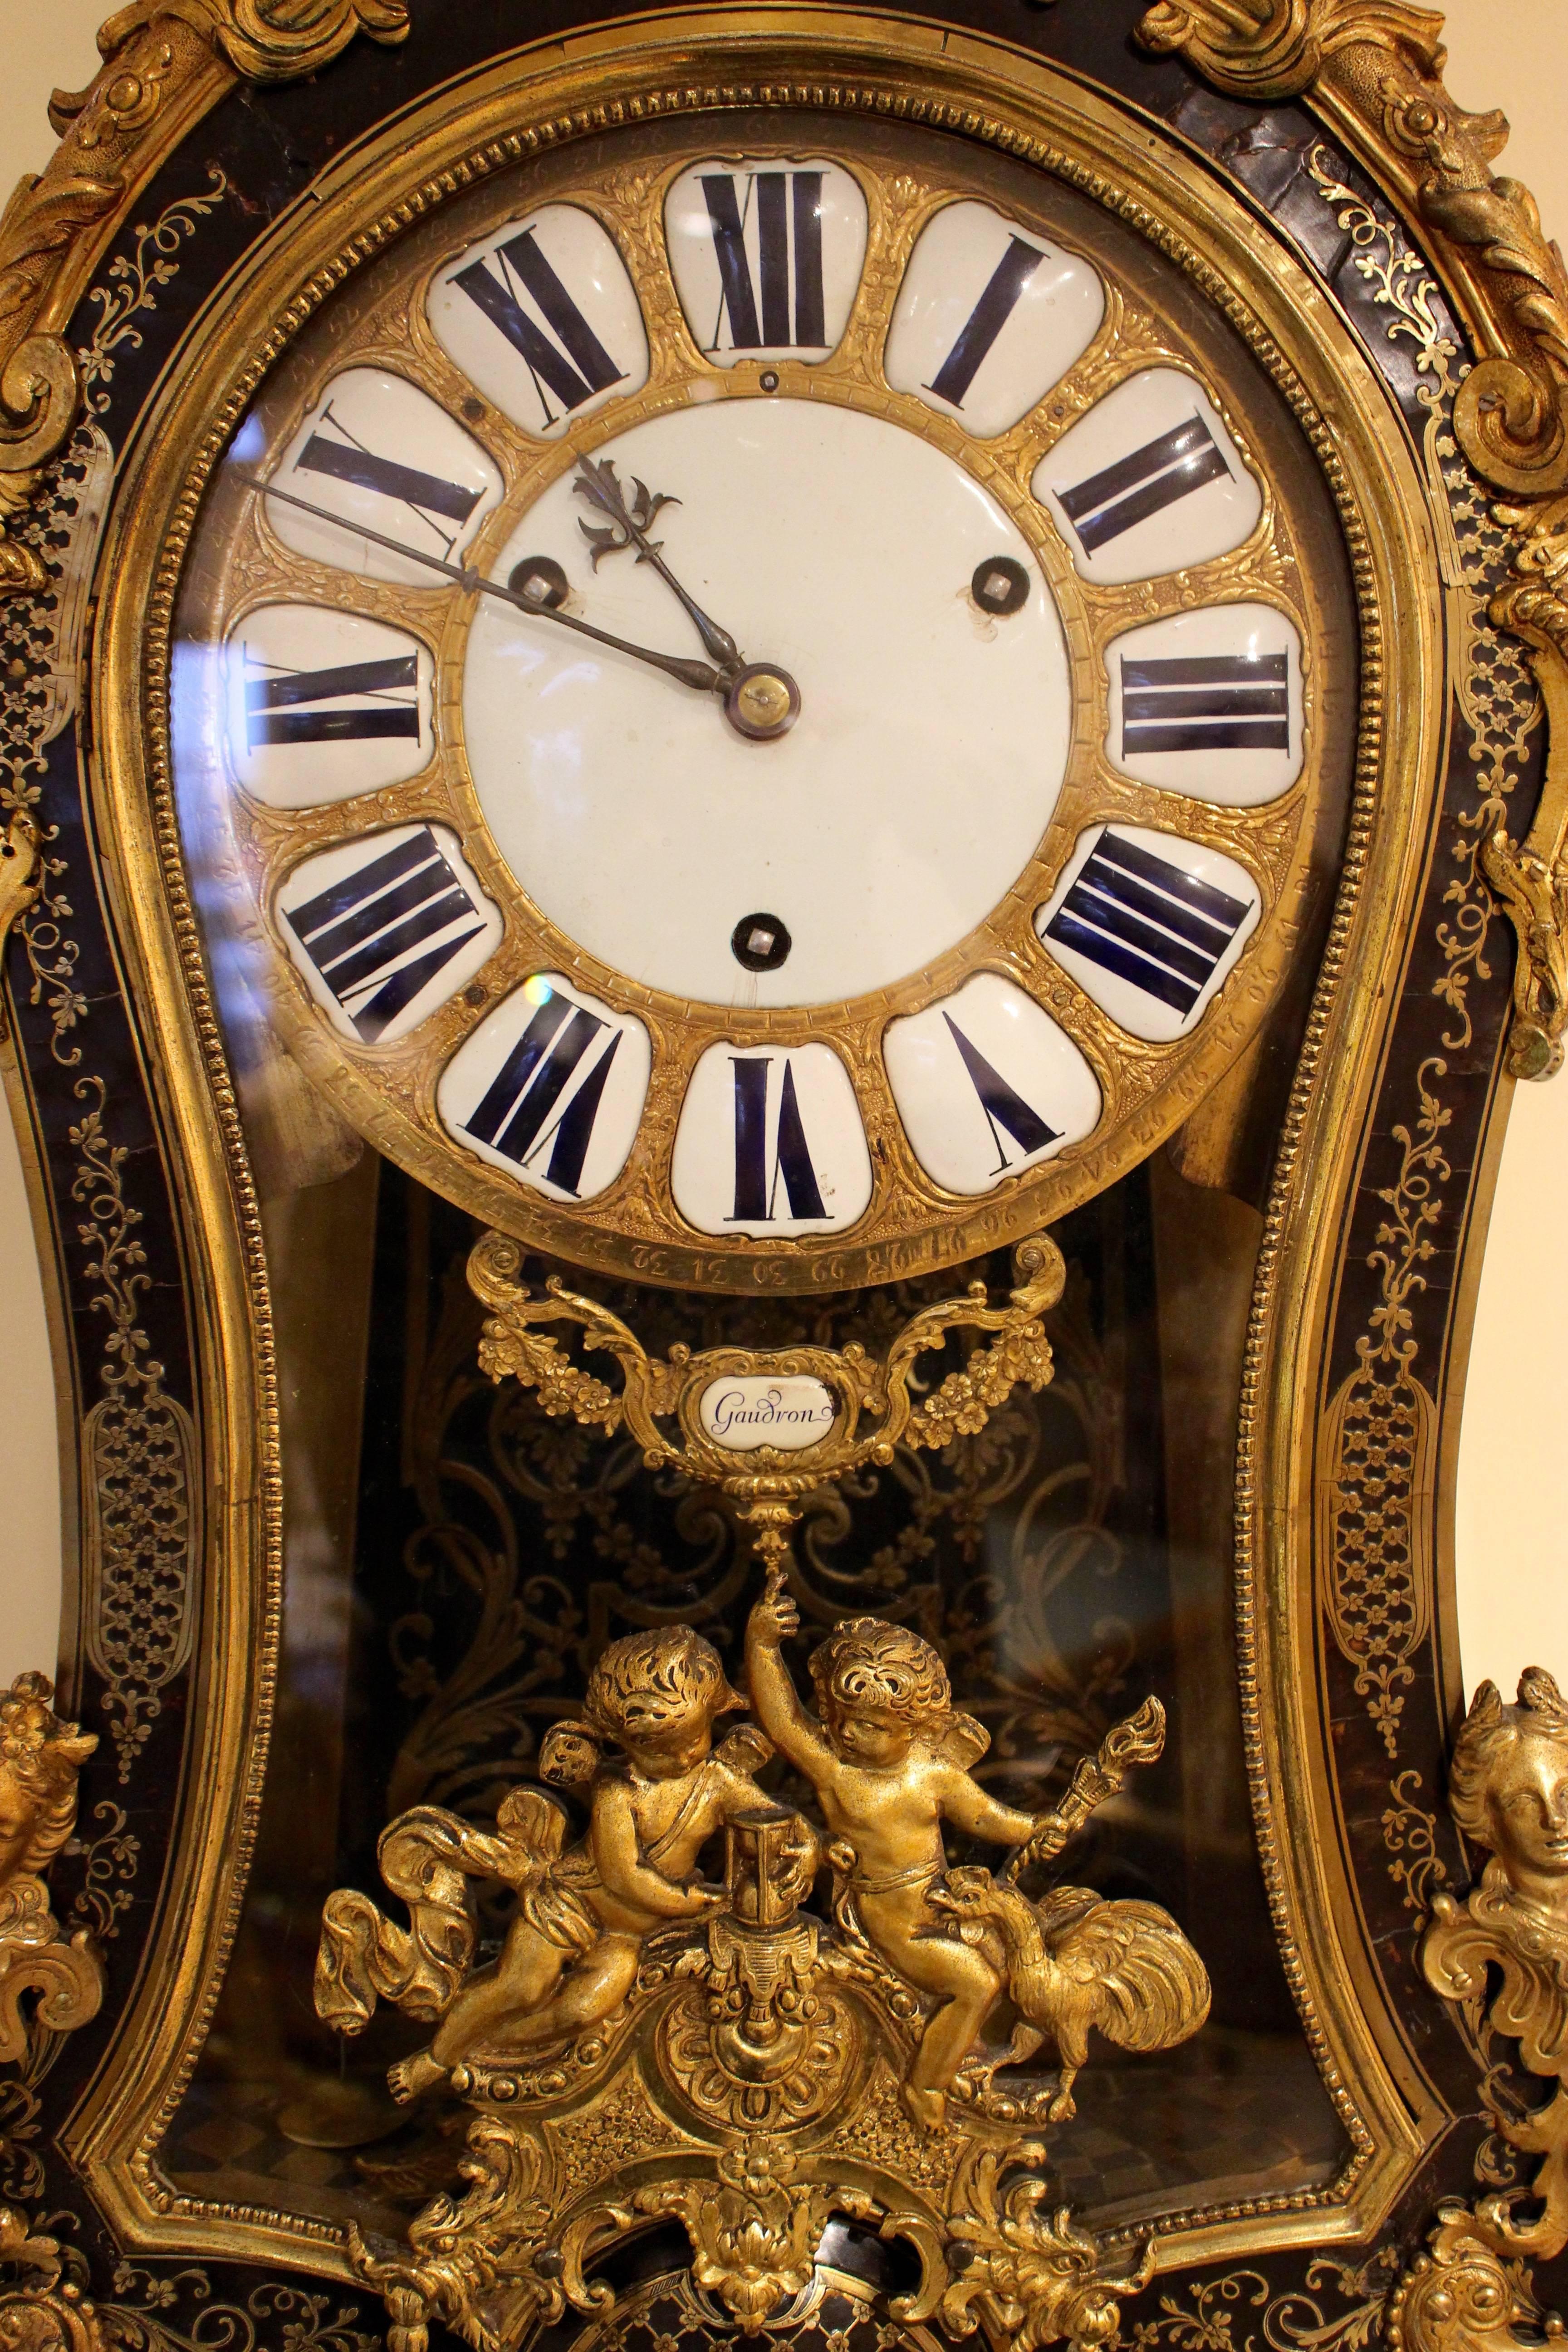 A French period Régence Boulle marquetry bracket clock from the early 18th century with Antoine Gaudron movement, ormolu mounts, brass and tortoiseshell inlay and mythological décor. Born in the early years of the 18th century, during the French